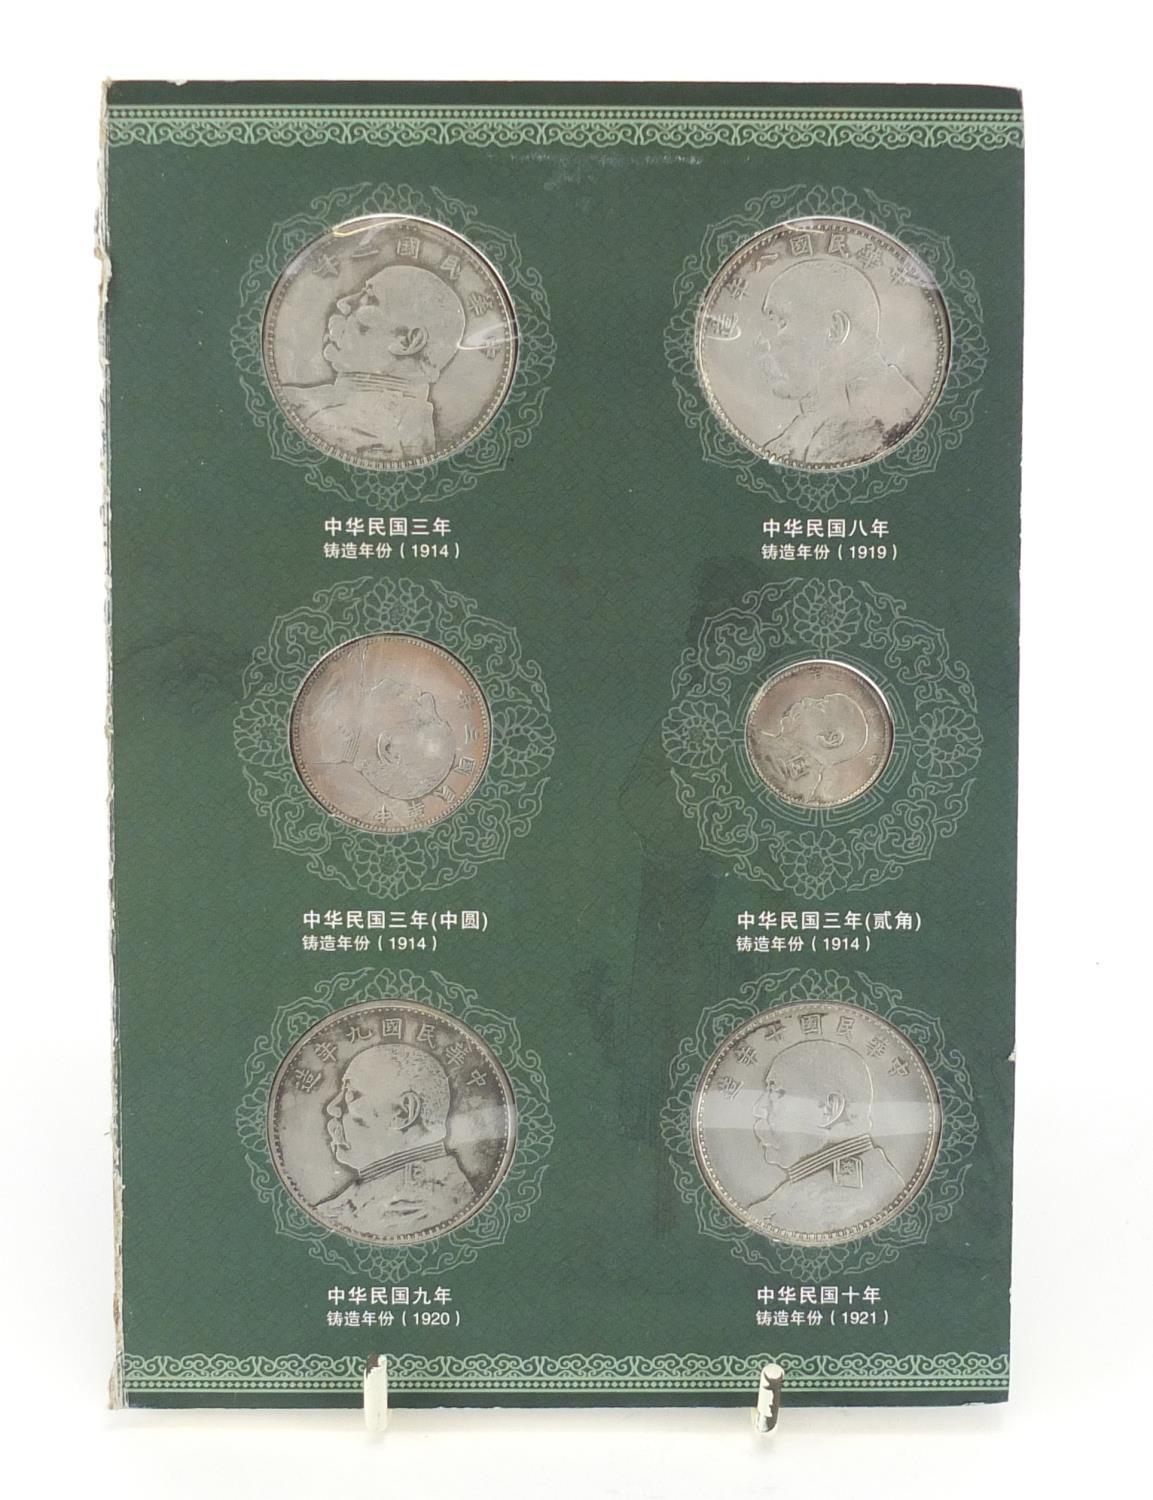 Six Chinese silver coloured metal fatman design coins : For Further Condition Reports Please visit